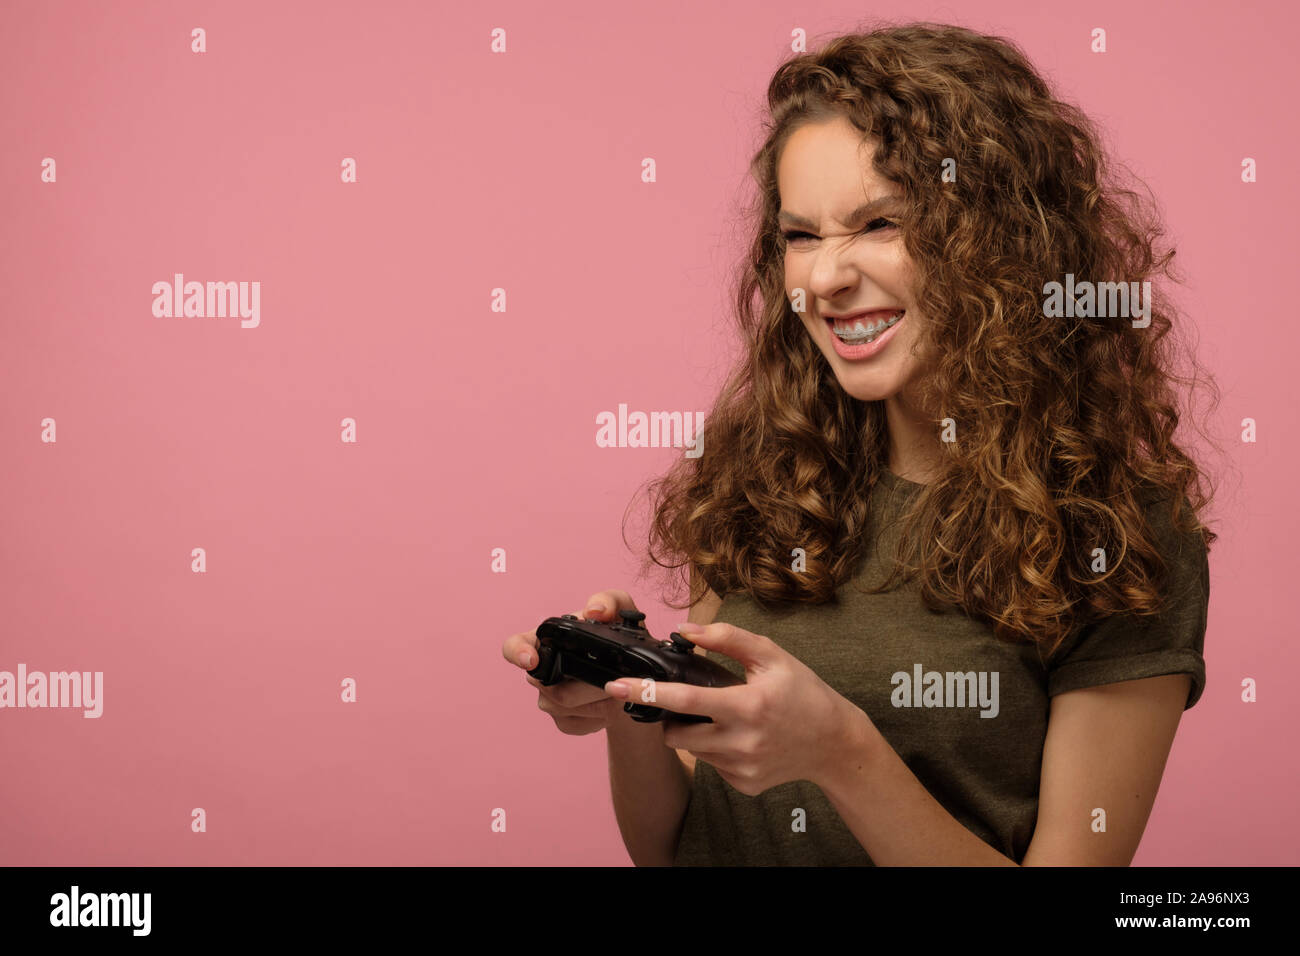 Pretty geek girl with curly hair holding gamepad and playing videogame isolated on pink background Stock Photo